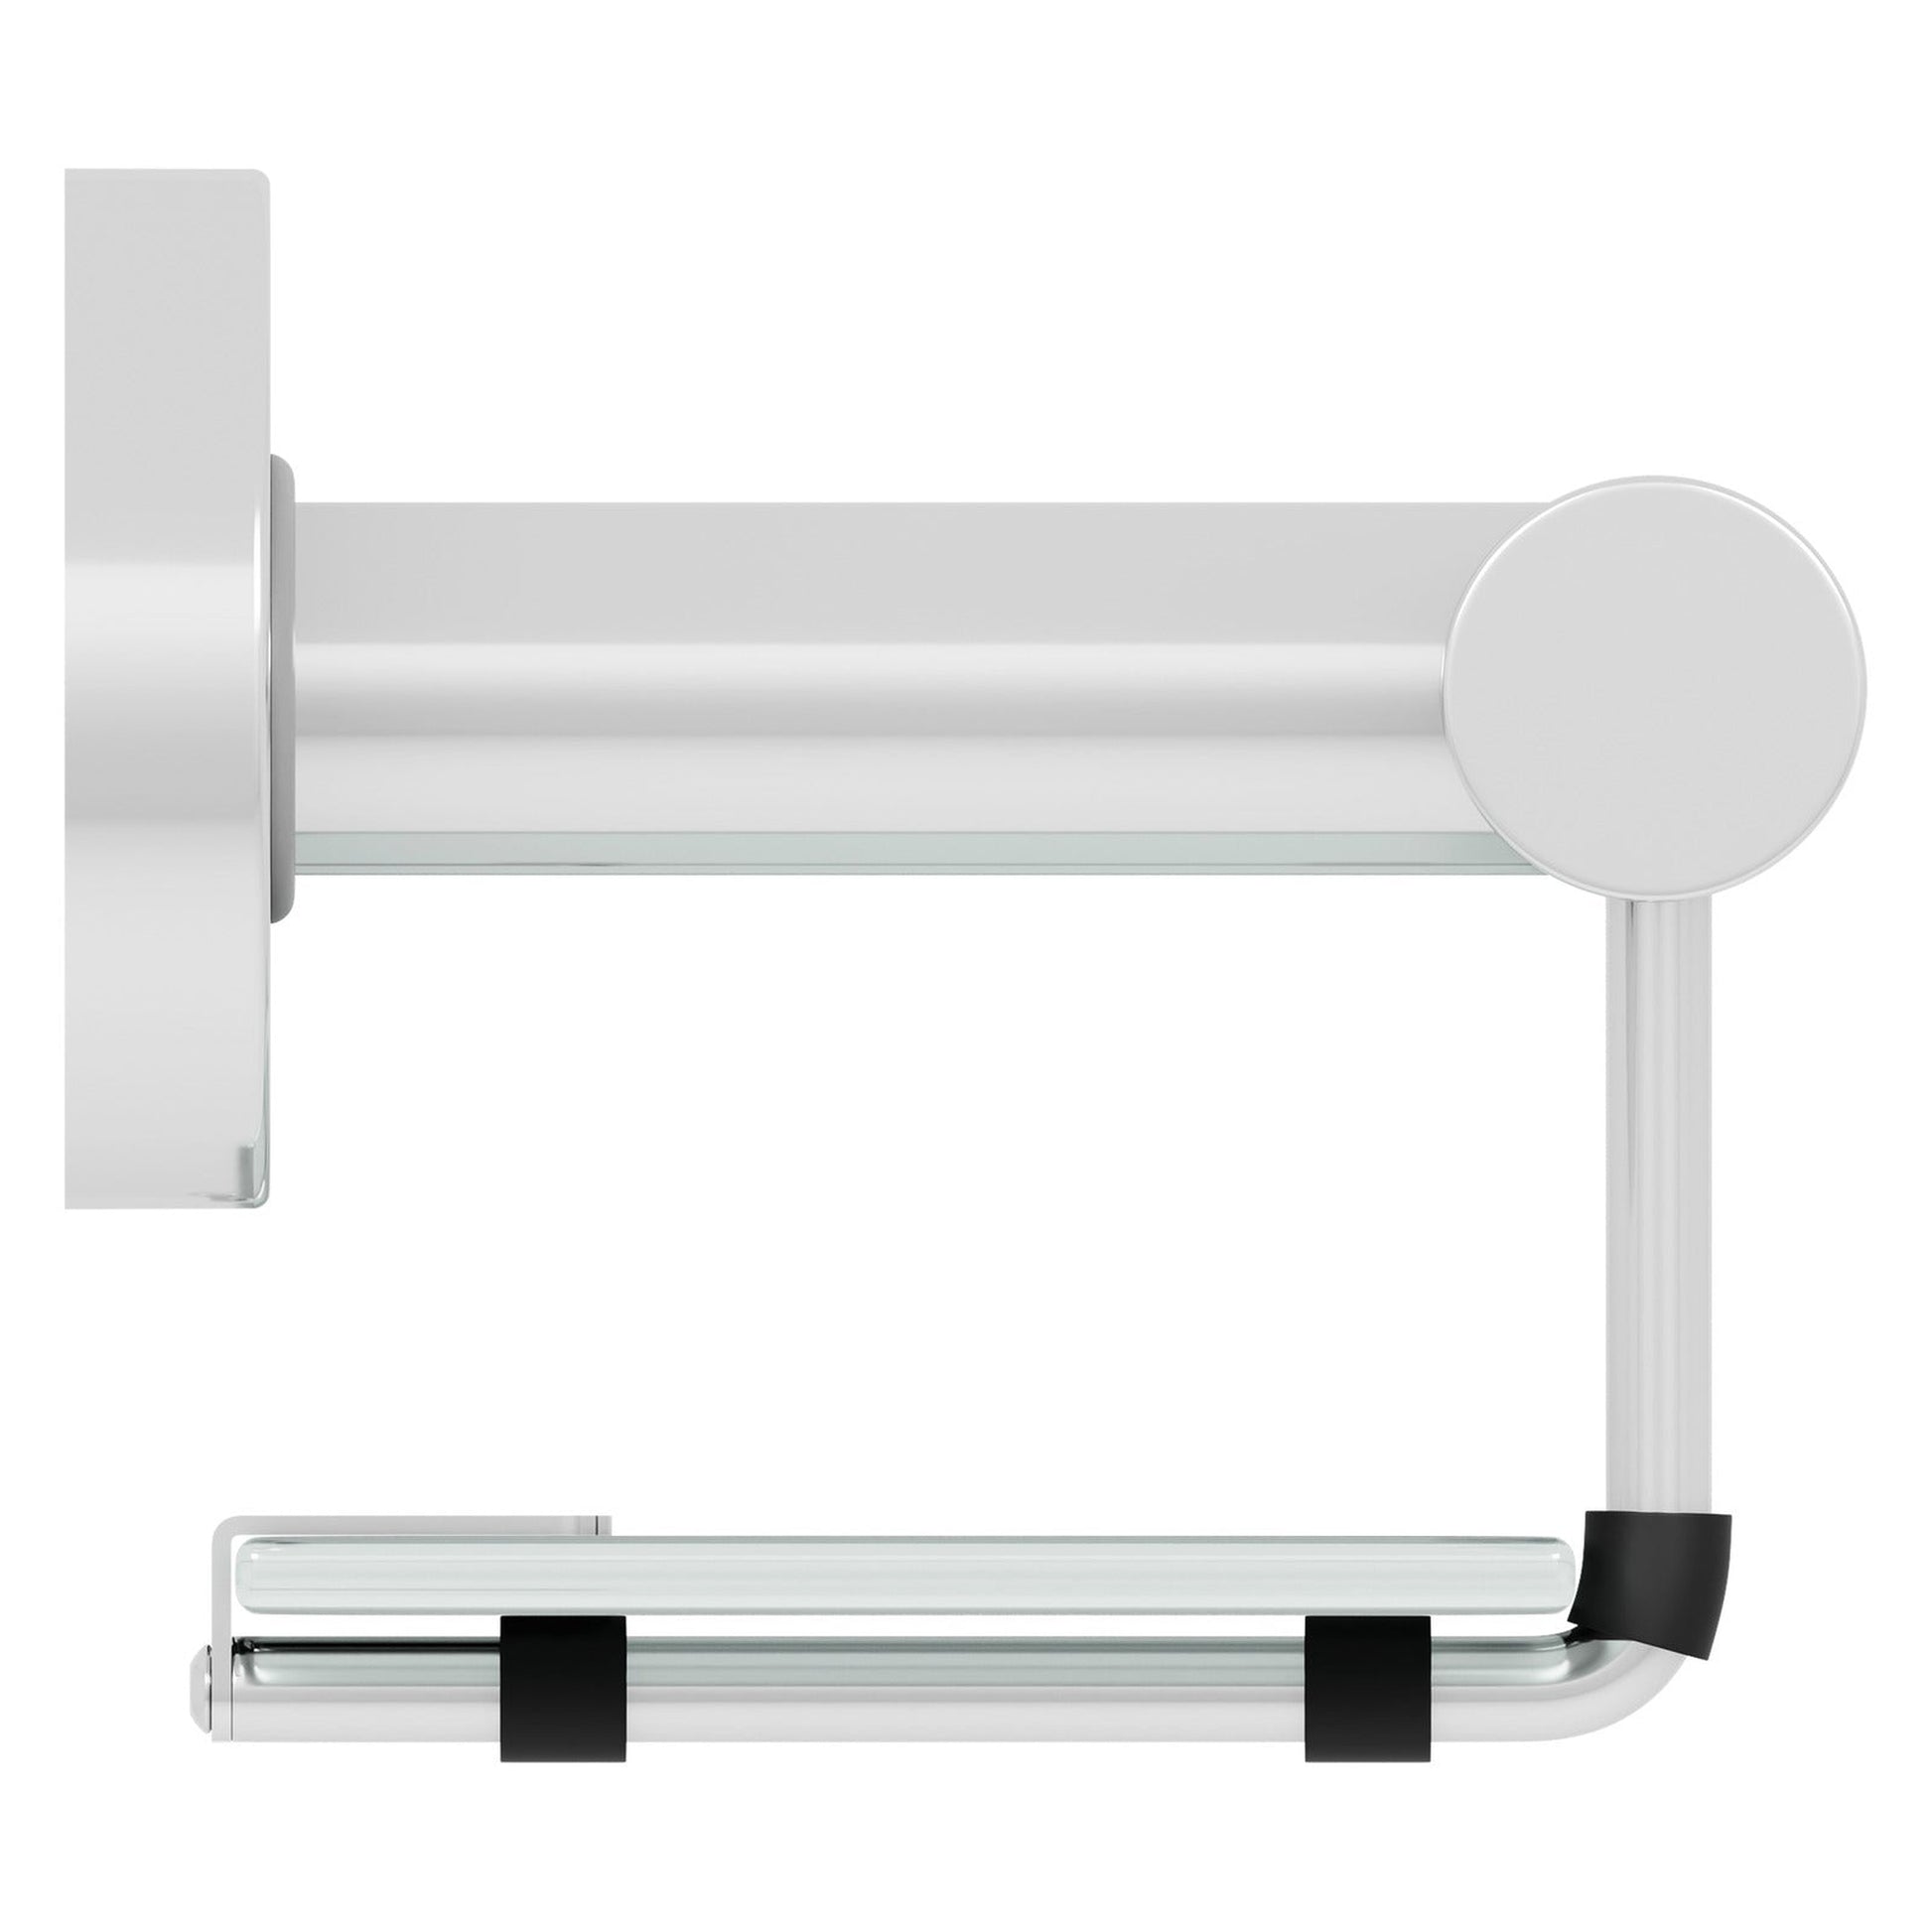 Evekare 19" Polished Stainless Steel Concealed Mount Shower/Bath Grab Bar With Integrated Glass Shelf